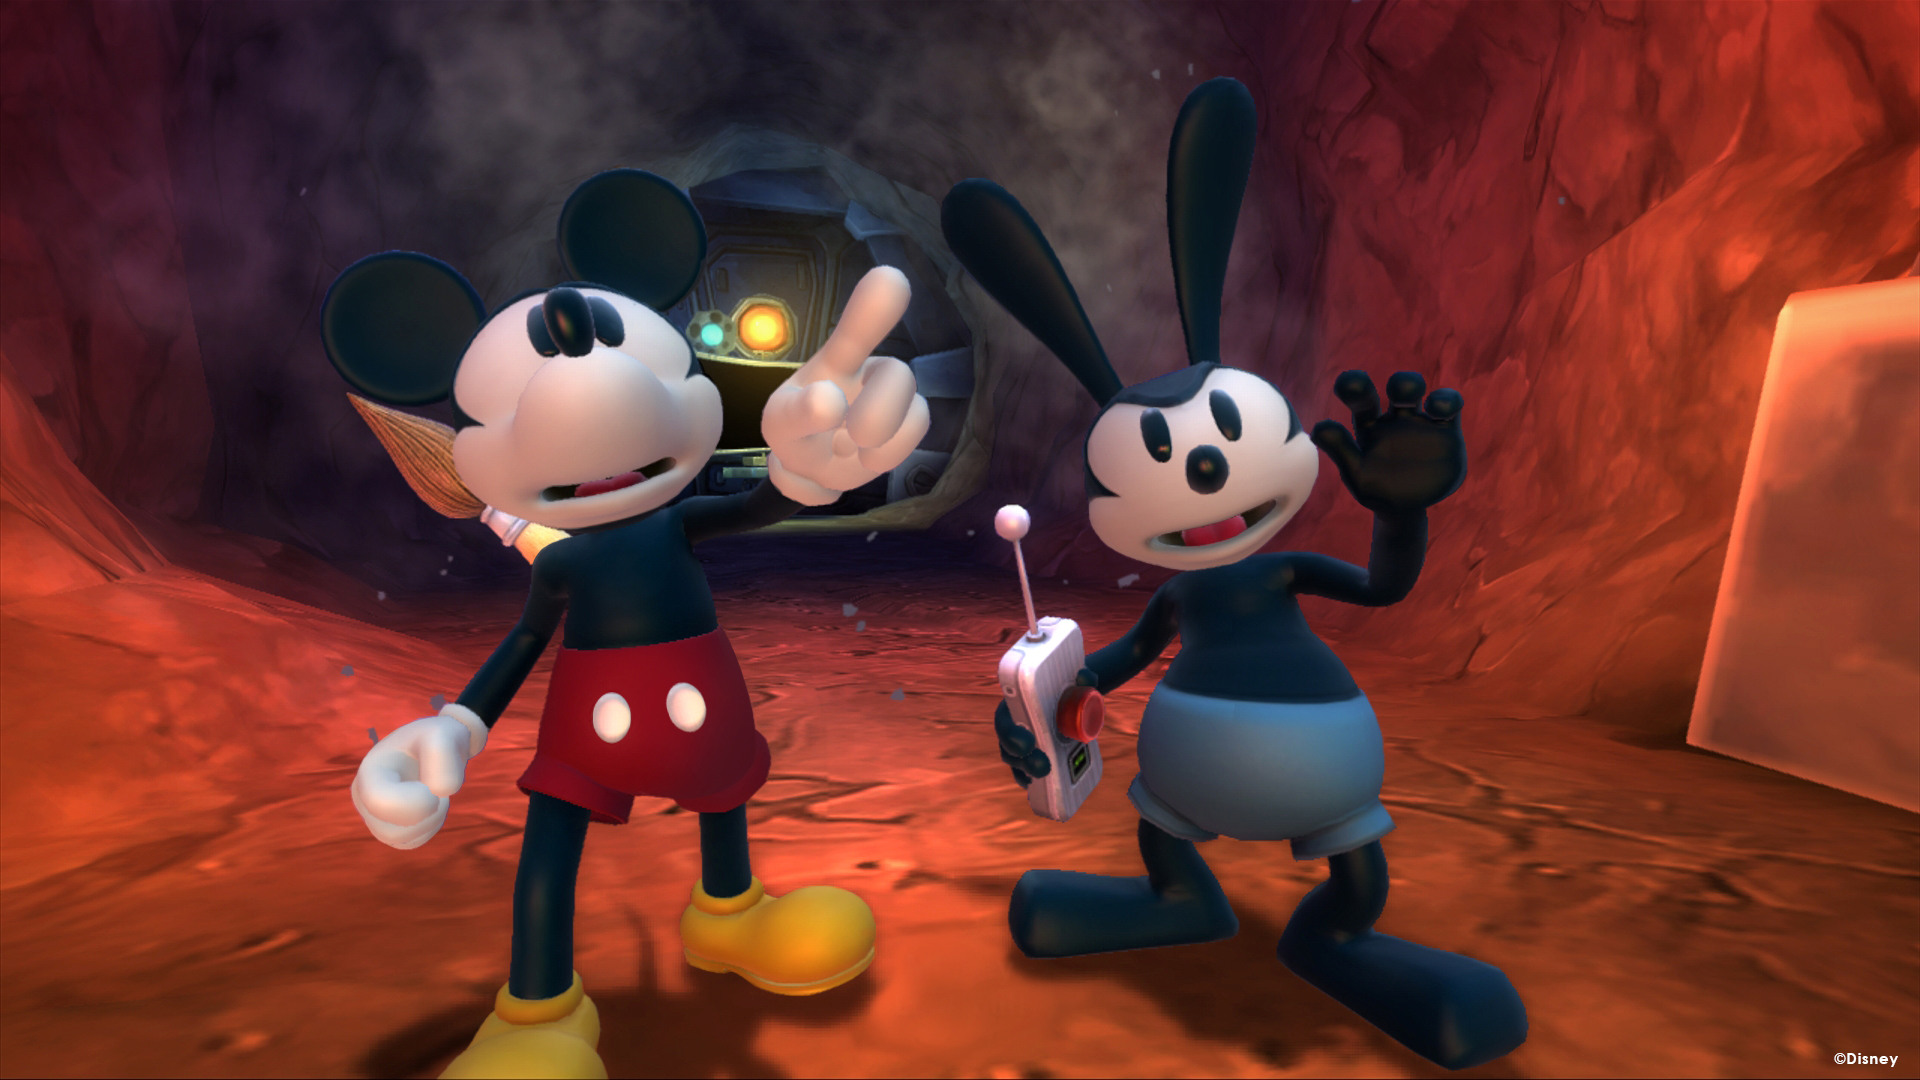 Disney Epic Mickey 2: The Power of Two on Steam